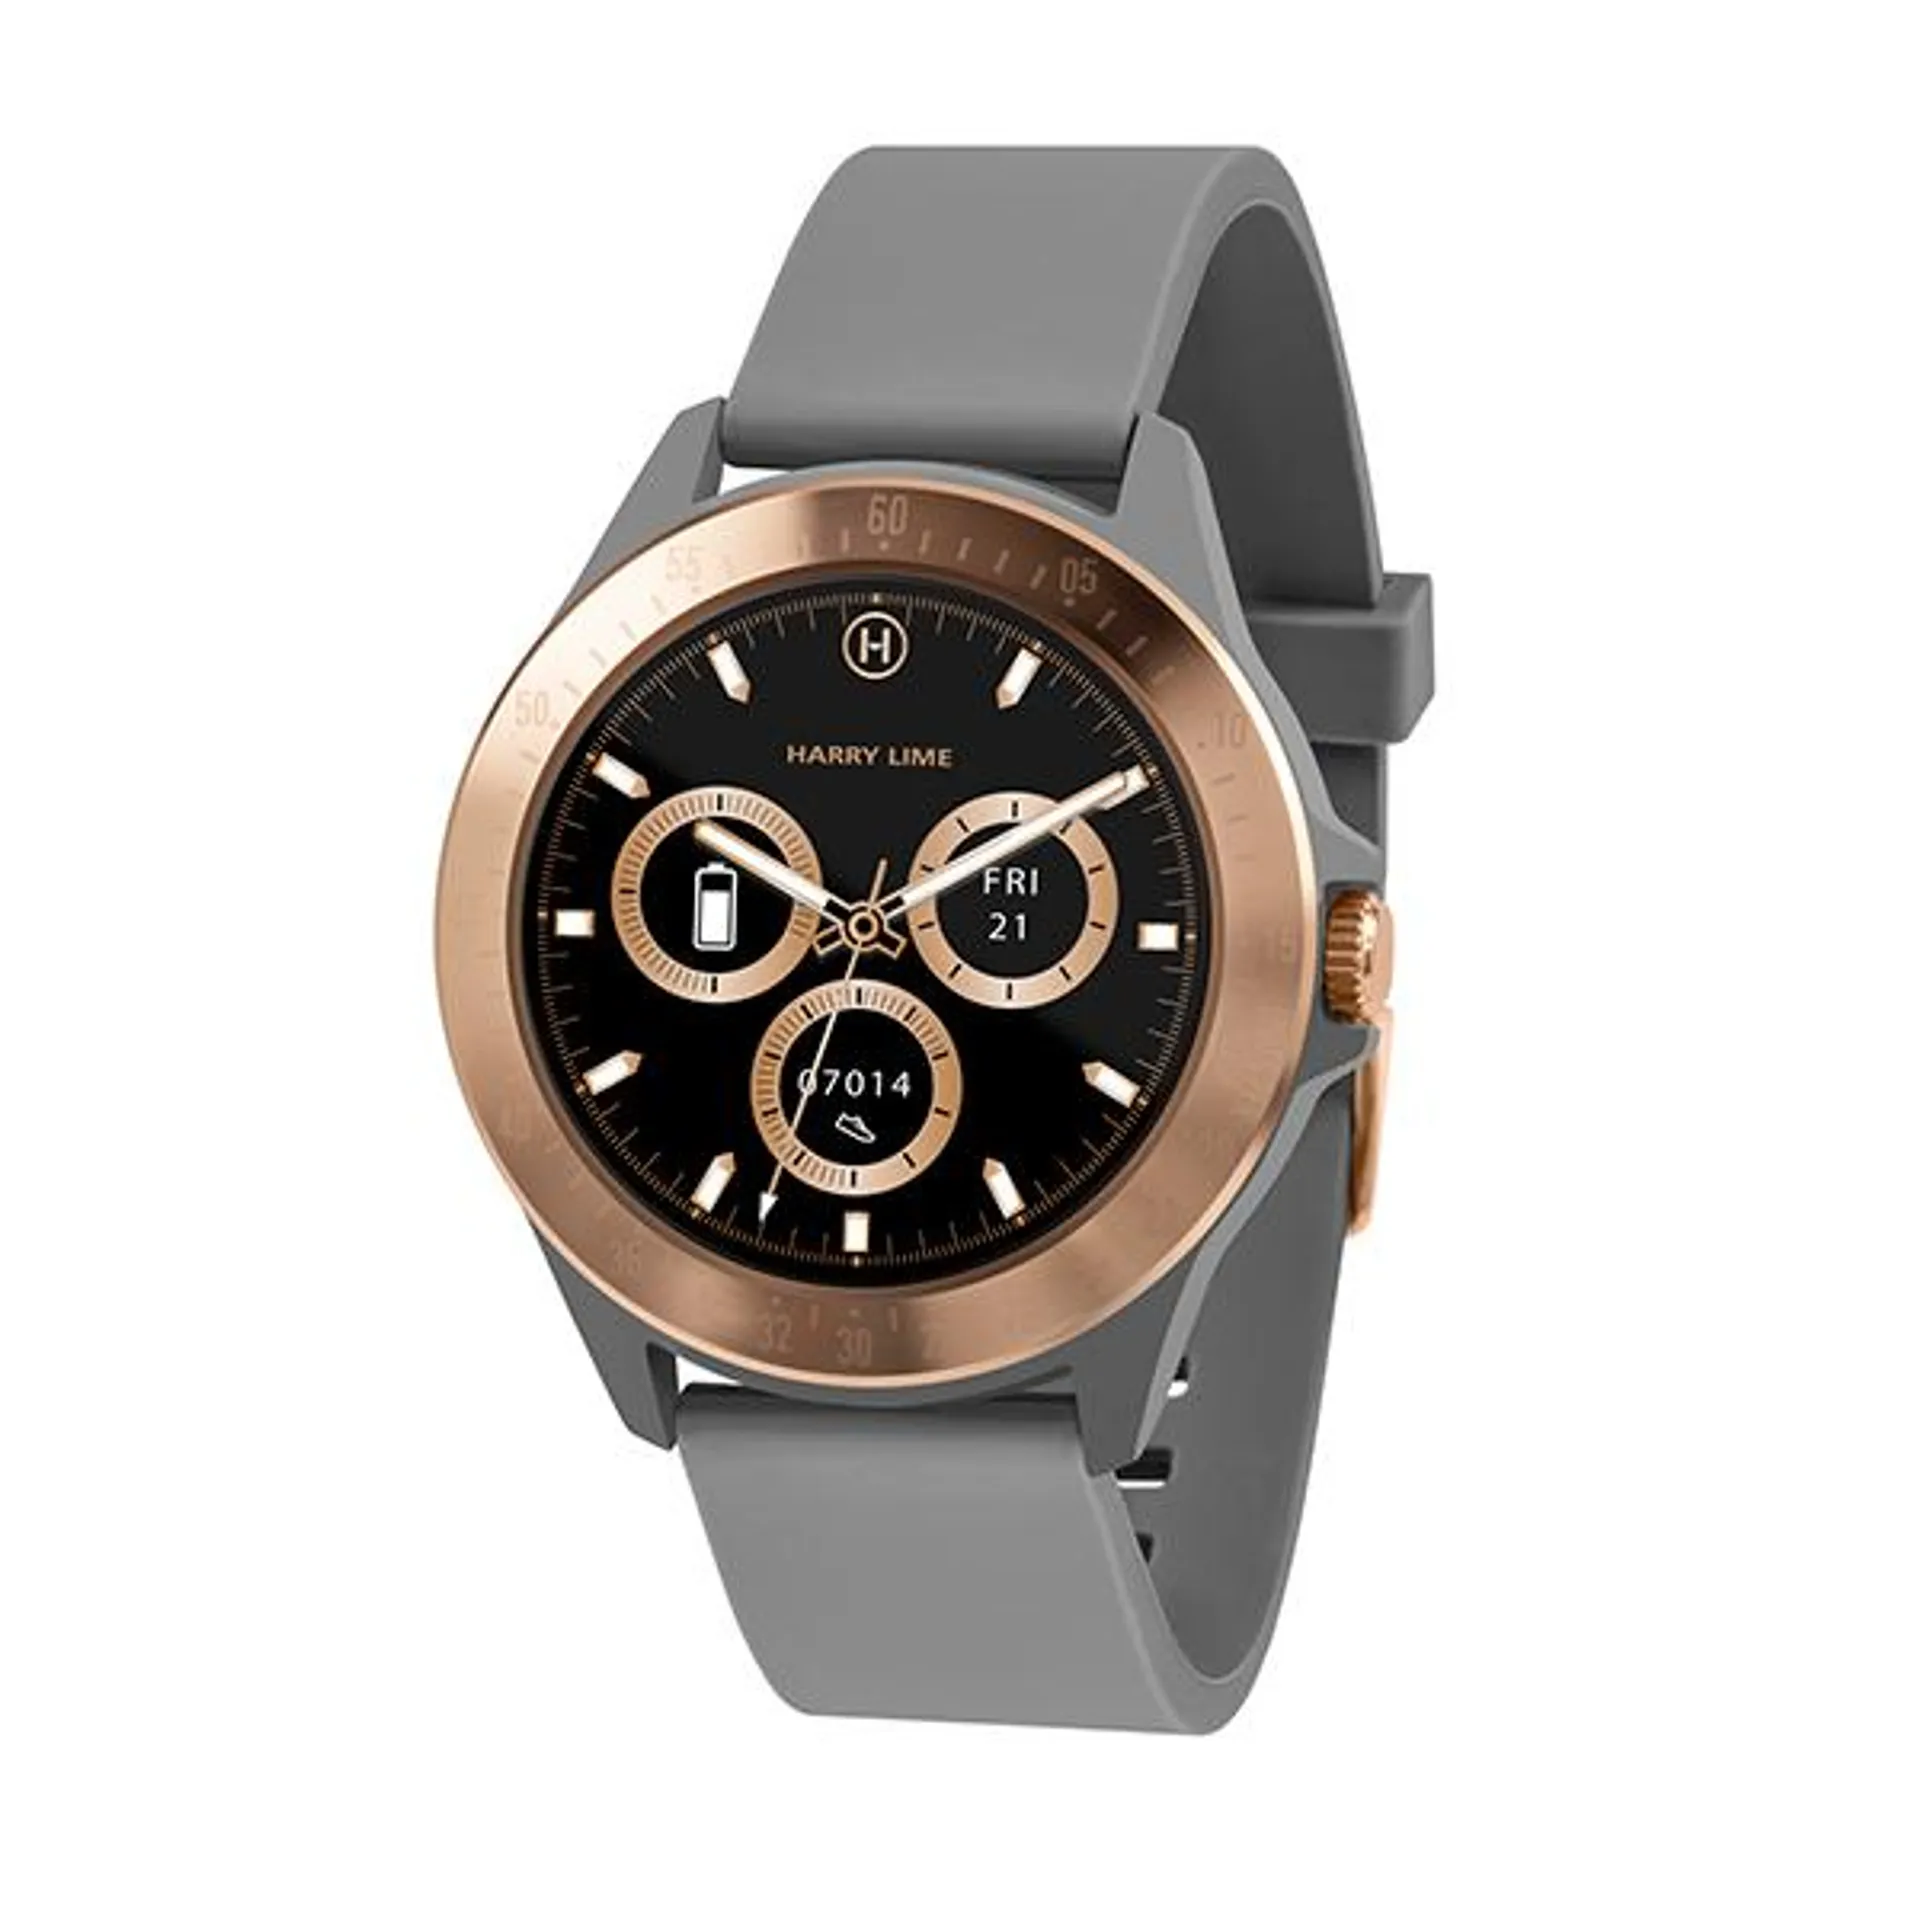 Harry Lime Fashion Smart Watch with Rose Gold Bezel and Silicone Strap